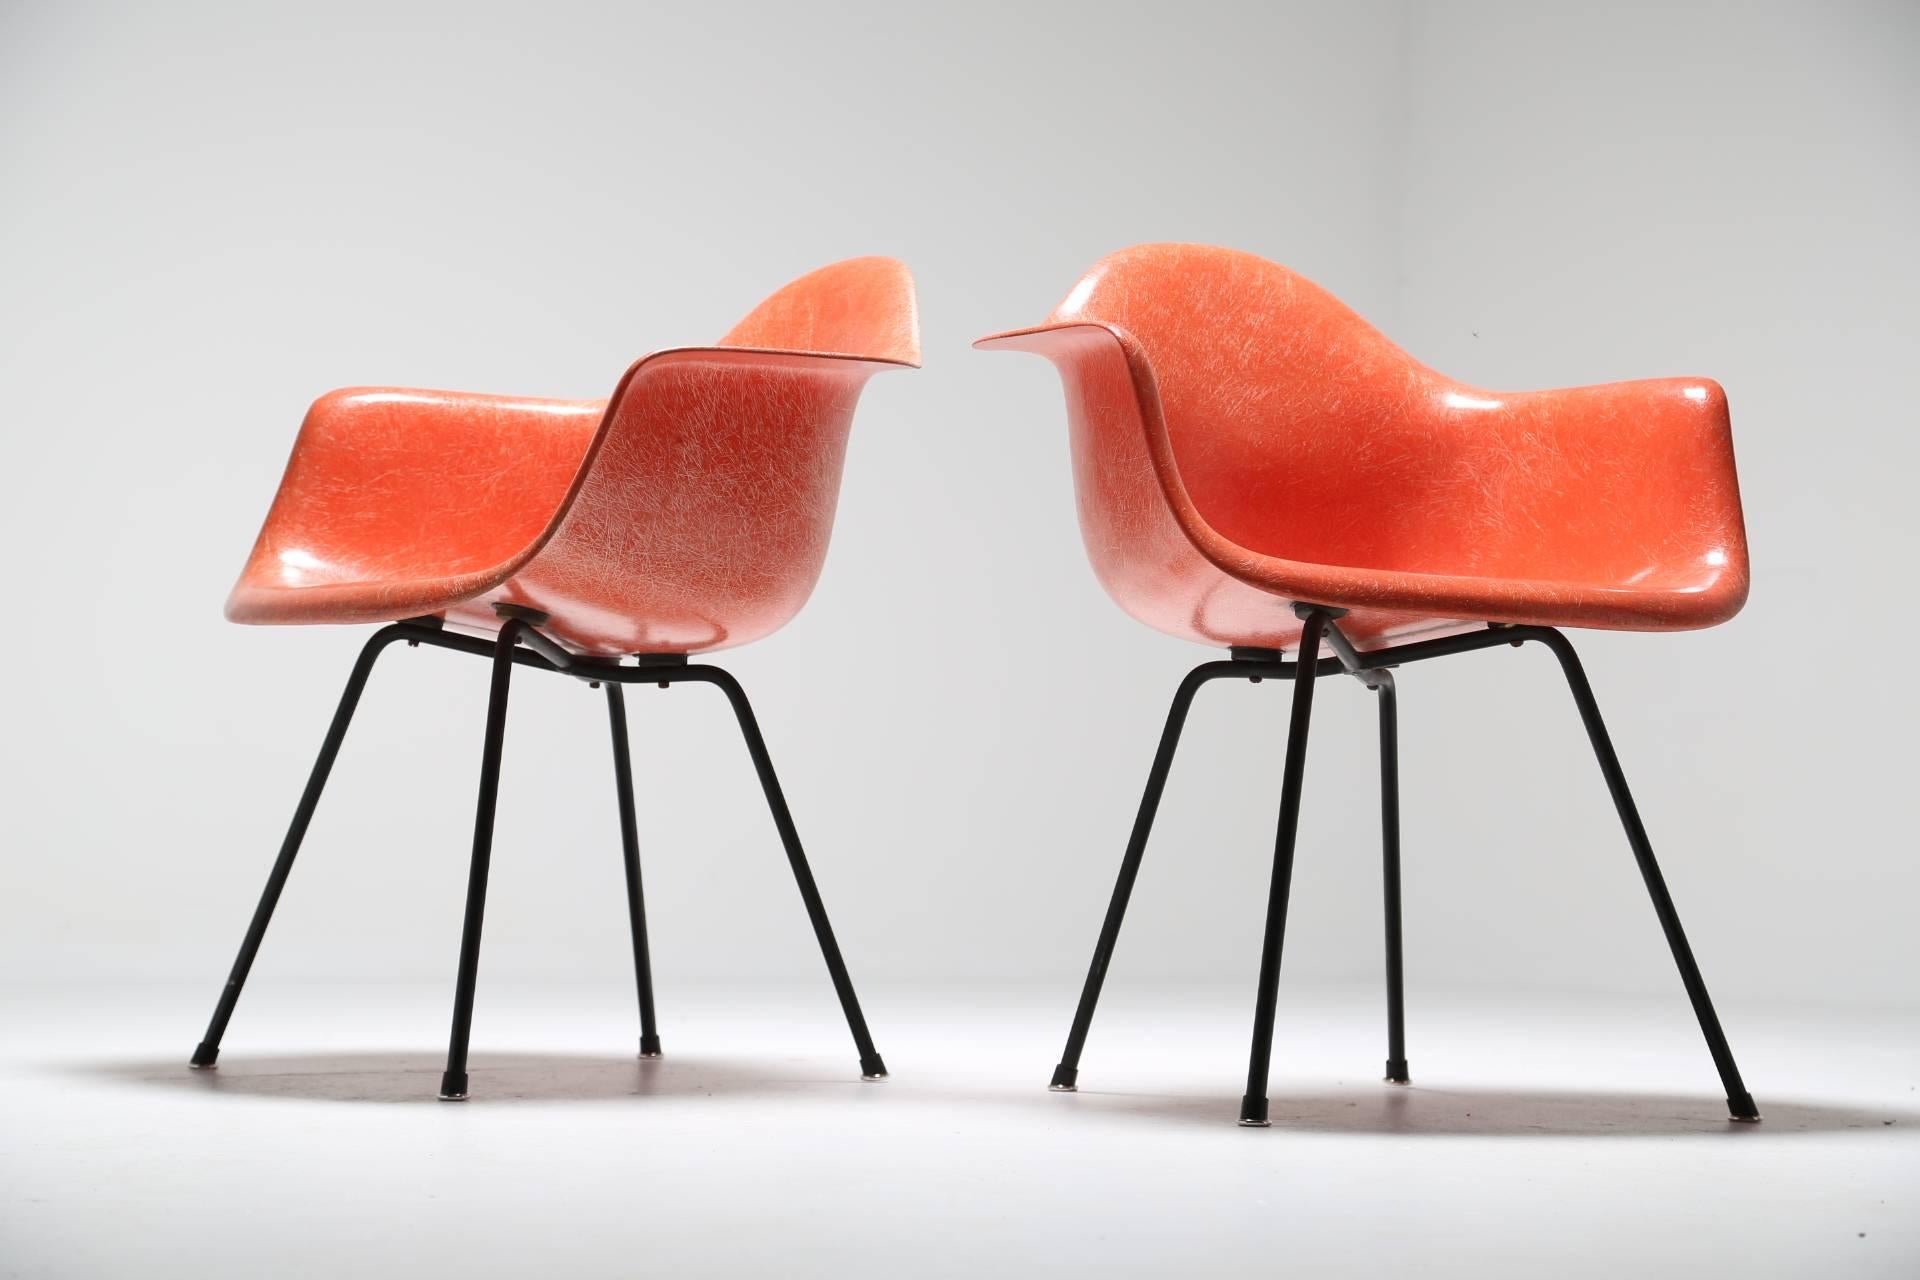 This is a fabulous set of second generation Zenith fiberglass Dax chairs in a vibrant orange on black steel X-base that have become an iconic staple of Mid-Century design. Designed by Charles & Ray Eames for Herman Miller, these chairs are